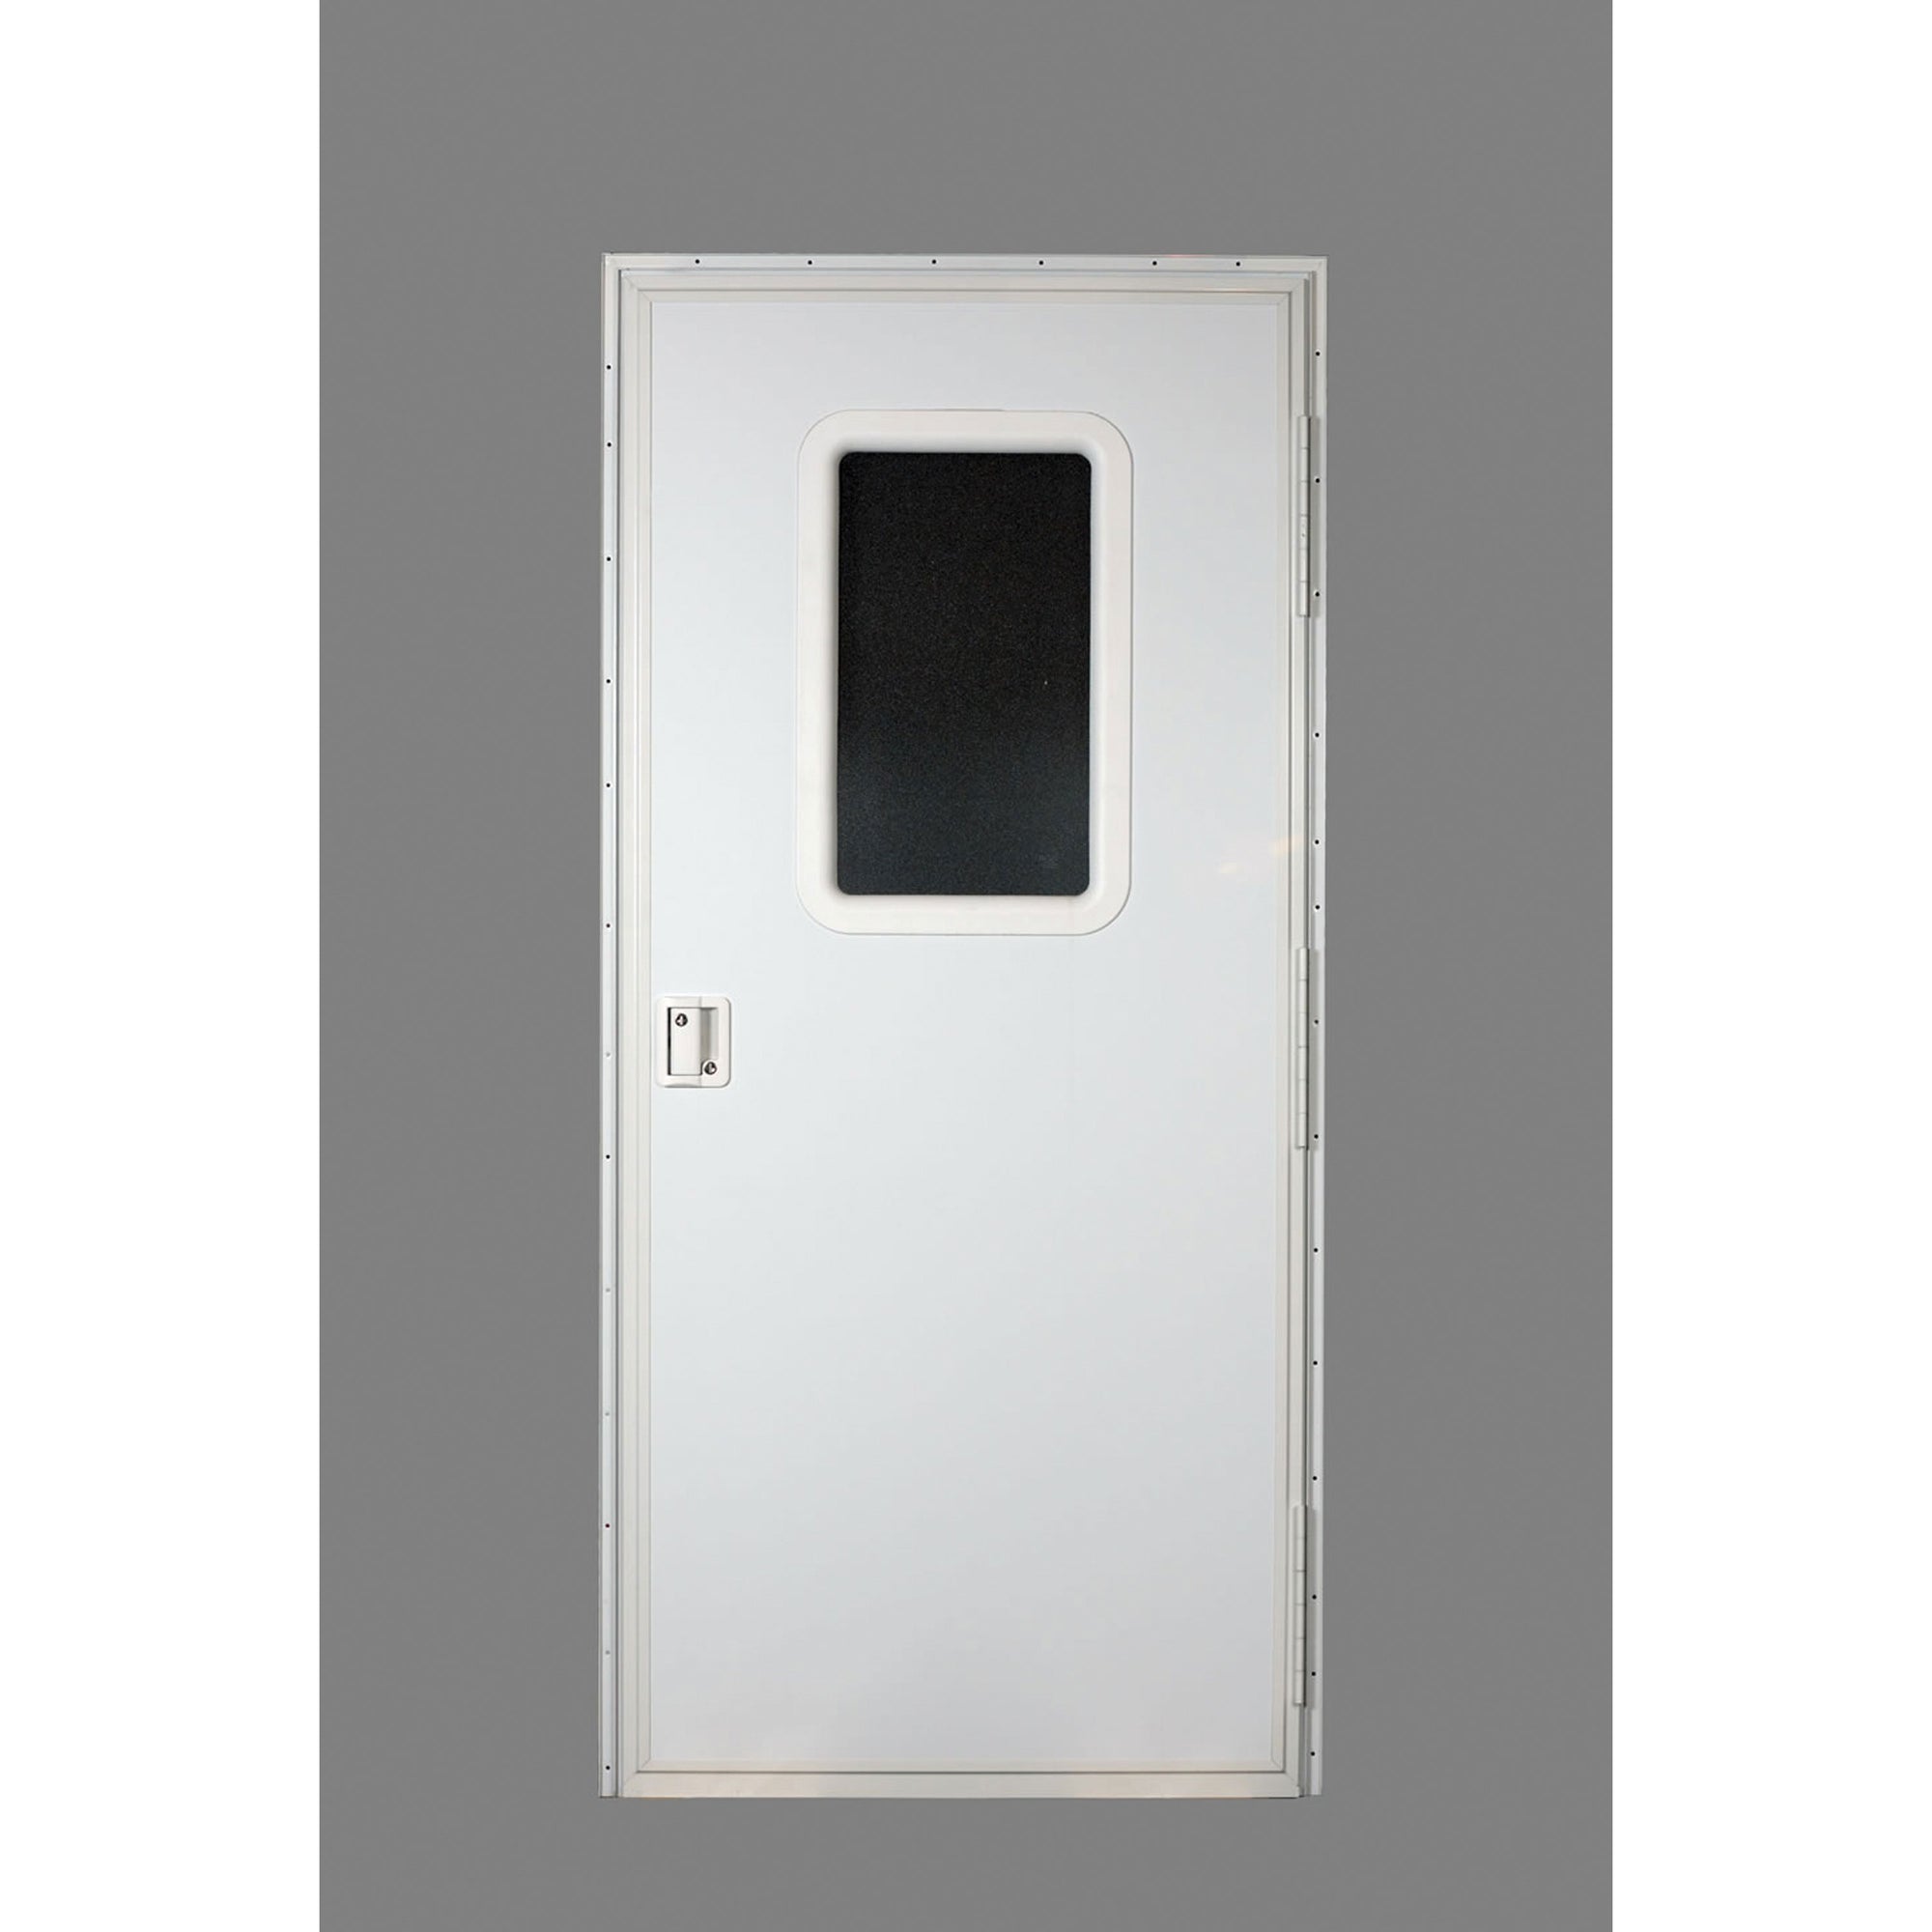 AP Products 015-217721 RV Square Entrance Door - 32" x 72", Polar White